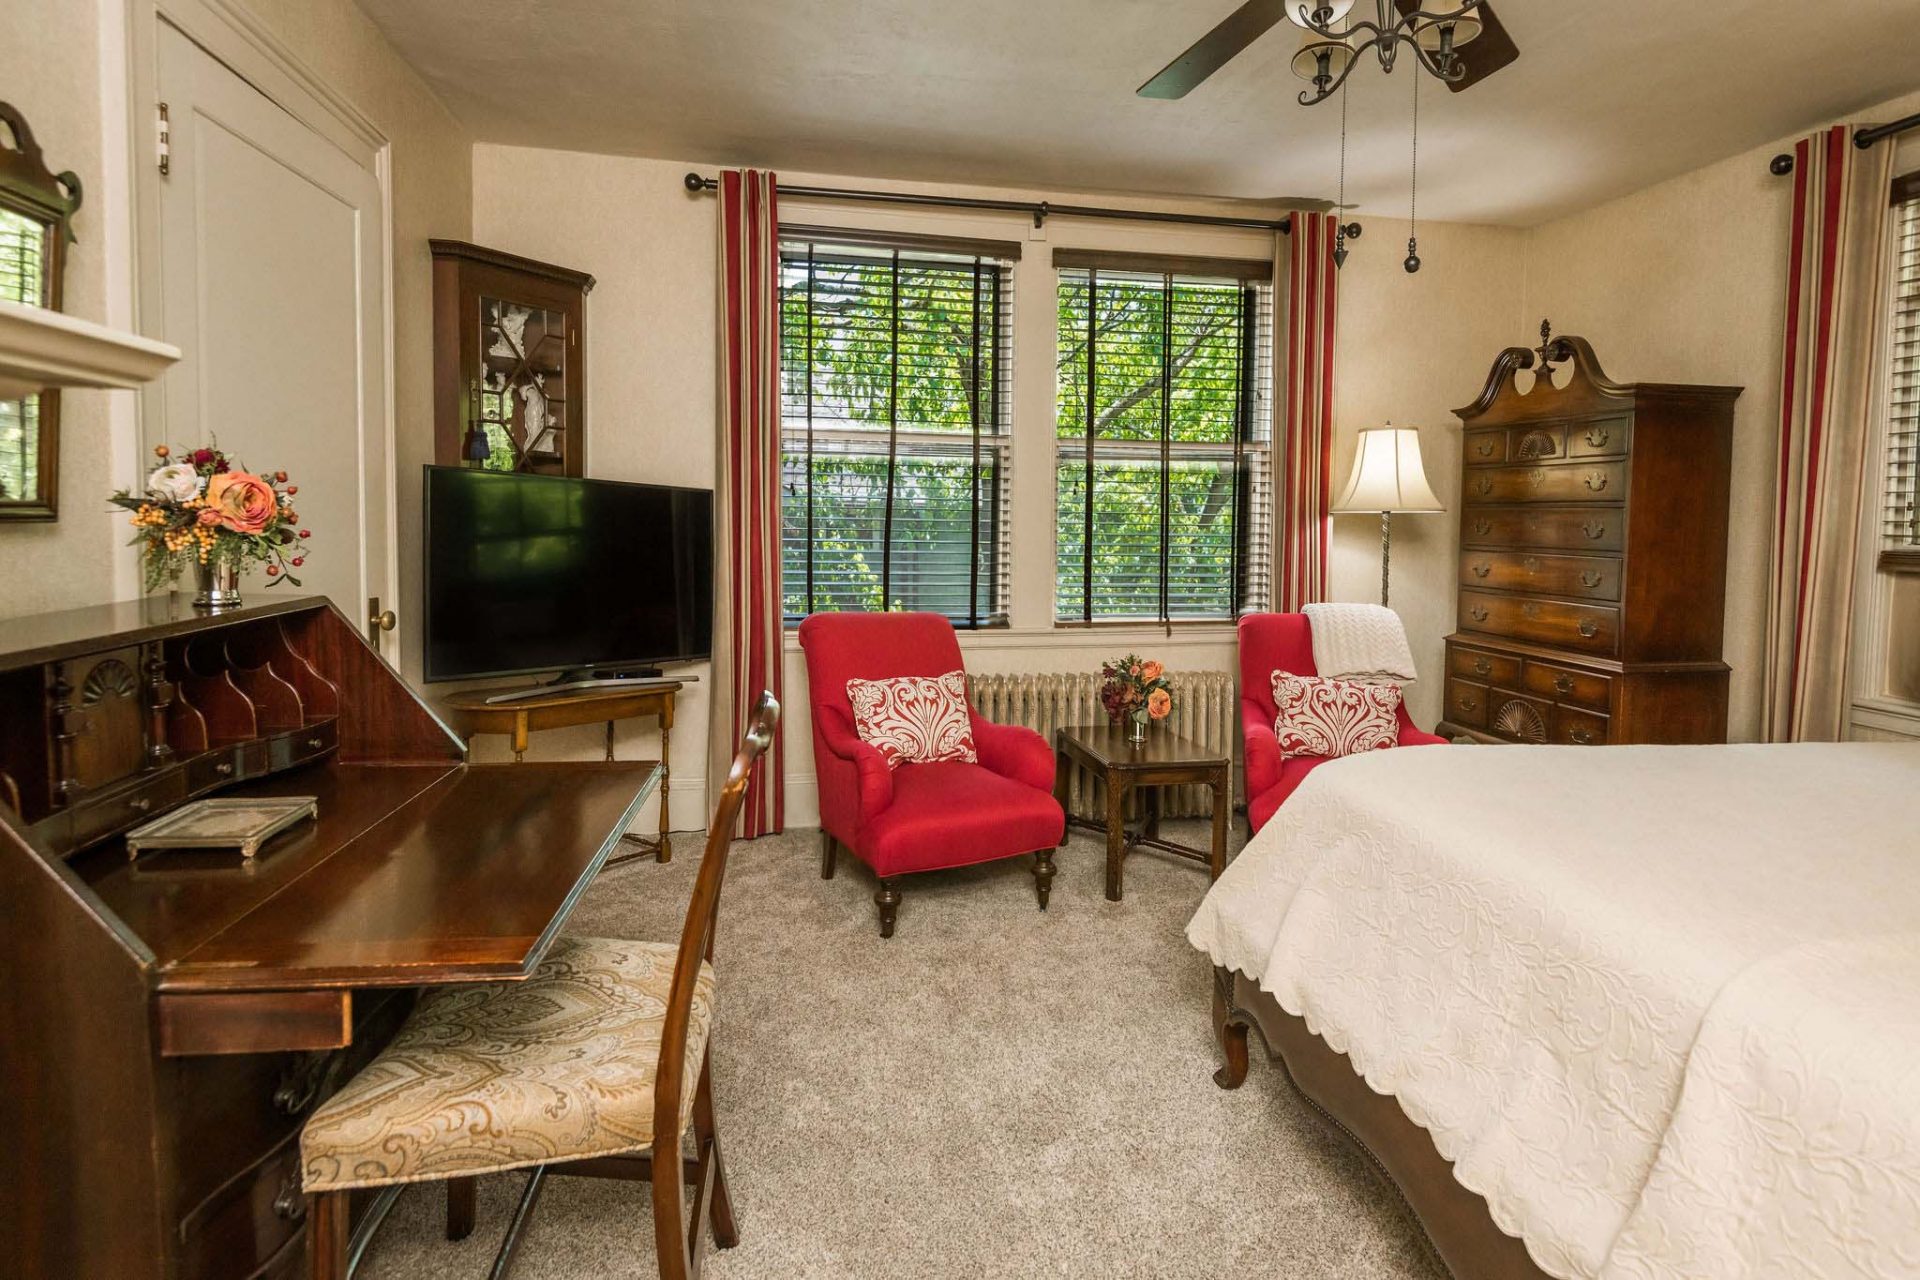 A carpeted king bedroom with two red club chairs, a dark wood dresser in the corner, a TV set, and a vintage desk